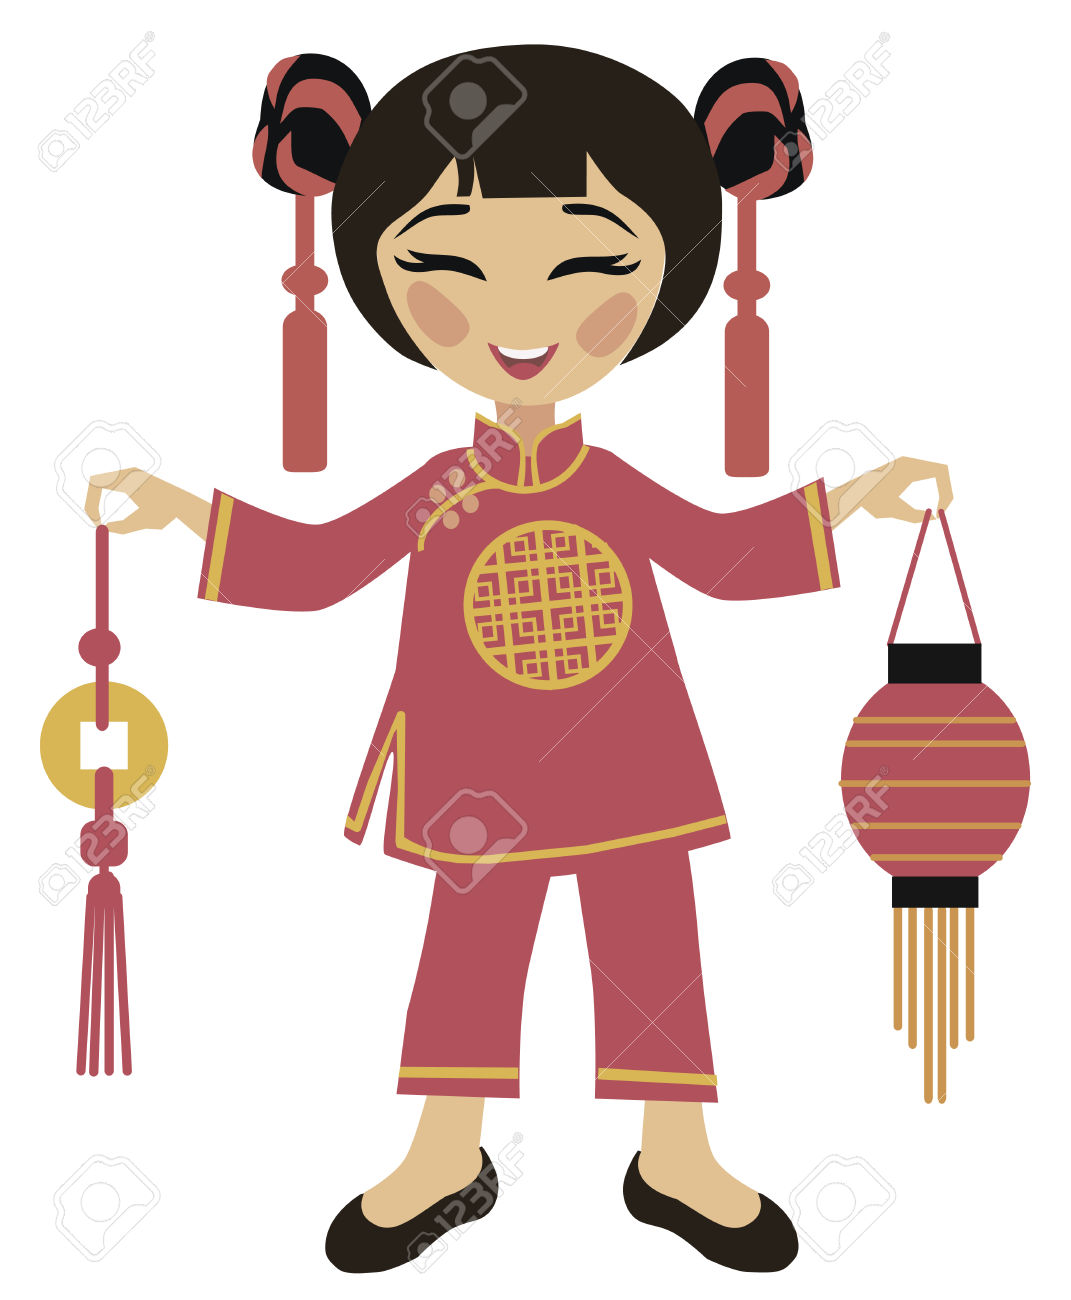 Clothes pencil and in. China clipart tradition chinese